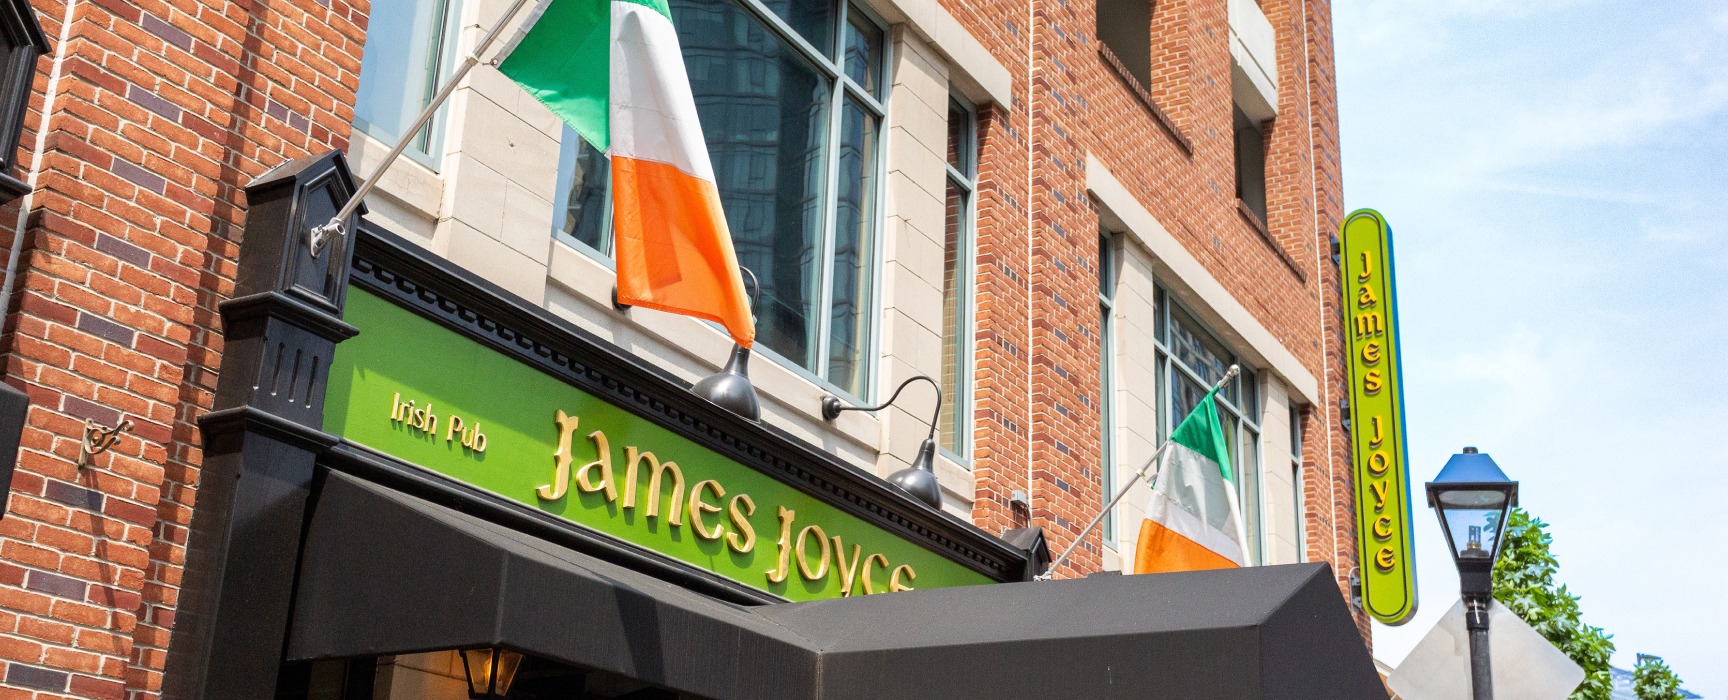 Wide angle closeup exterior of James Joyce Pub featuring brick storefront, black covered awning, and Irish flags